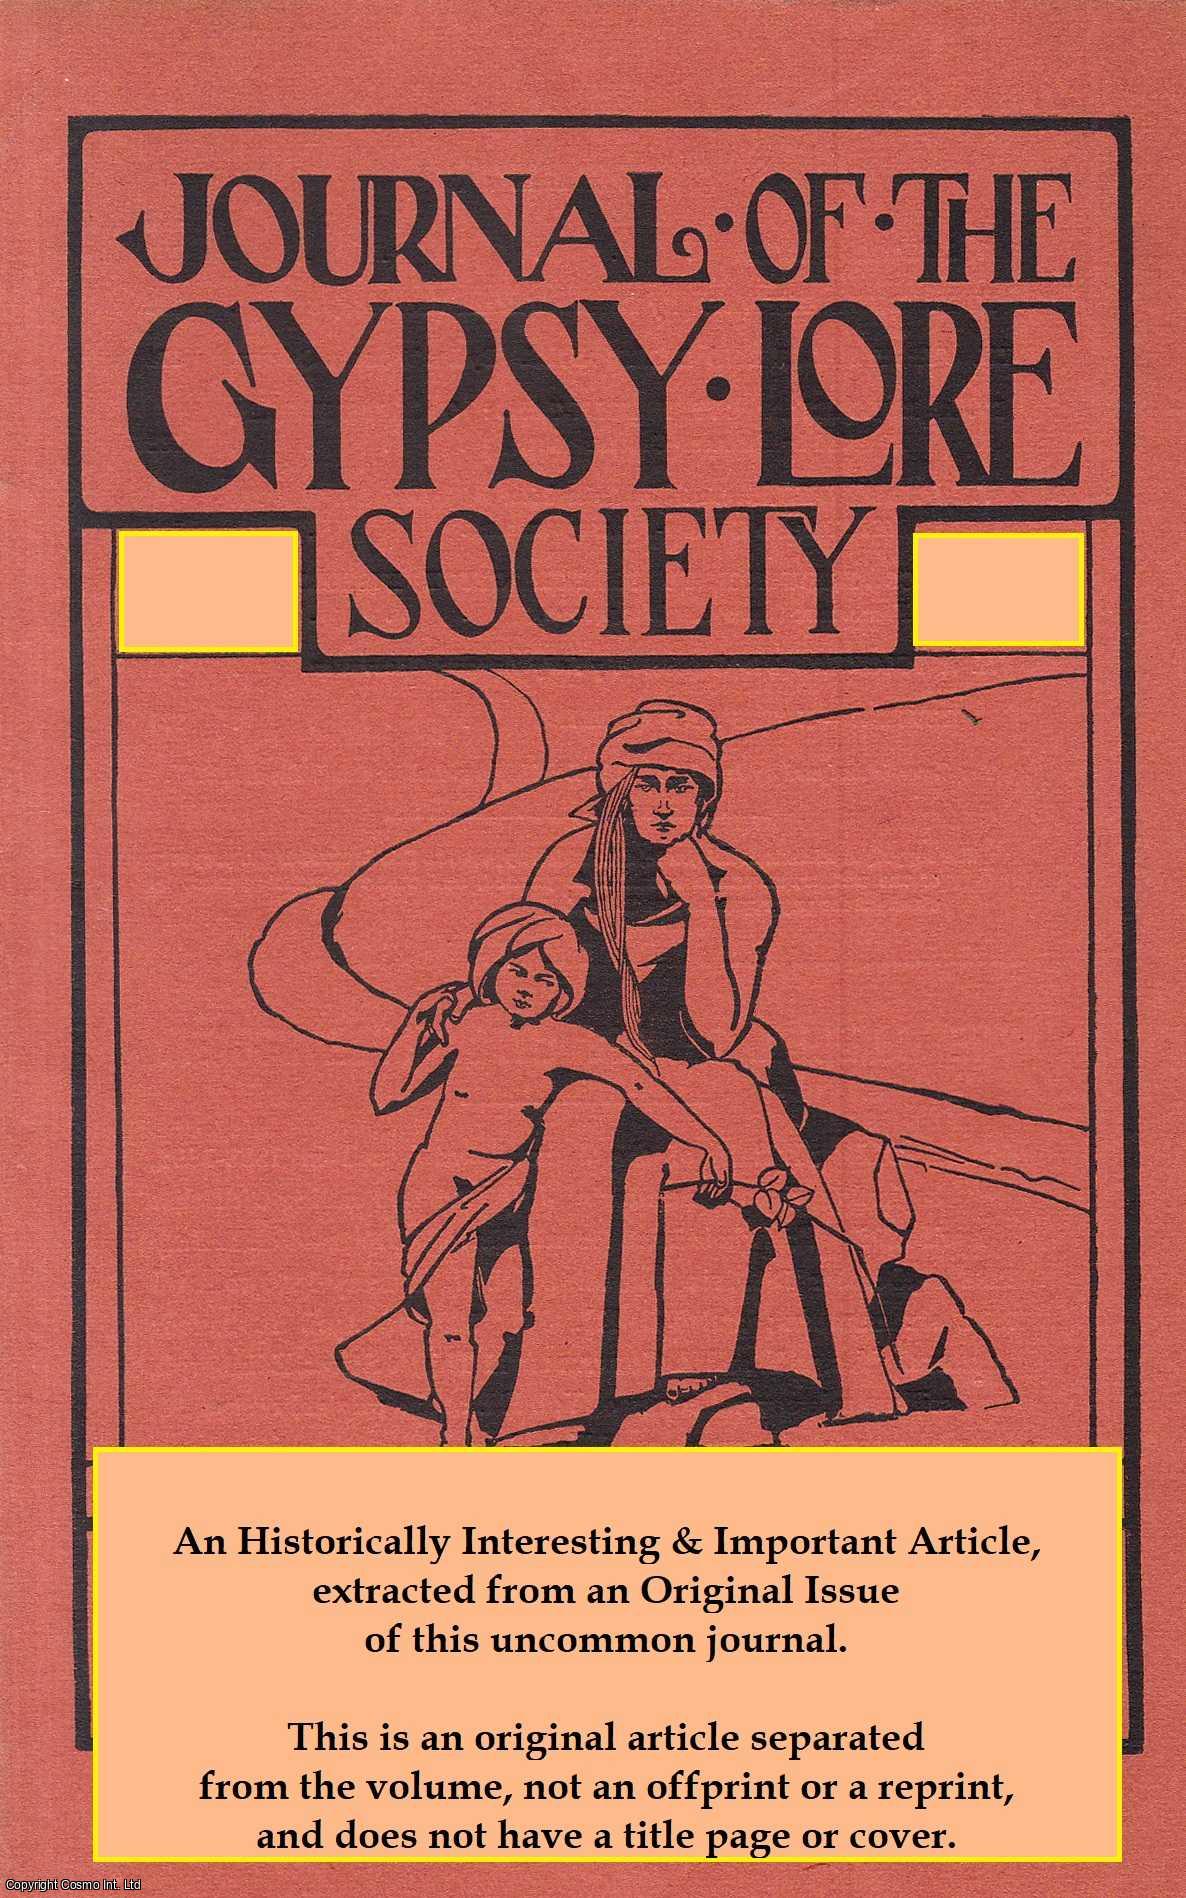 Andre Holleaux - In Defence of Gypsies. An uncommon original article from the Journal of the Gypsy Lore Society, 1949.